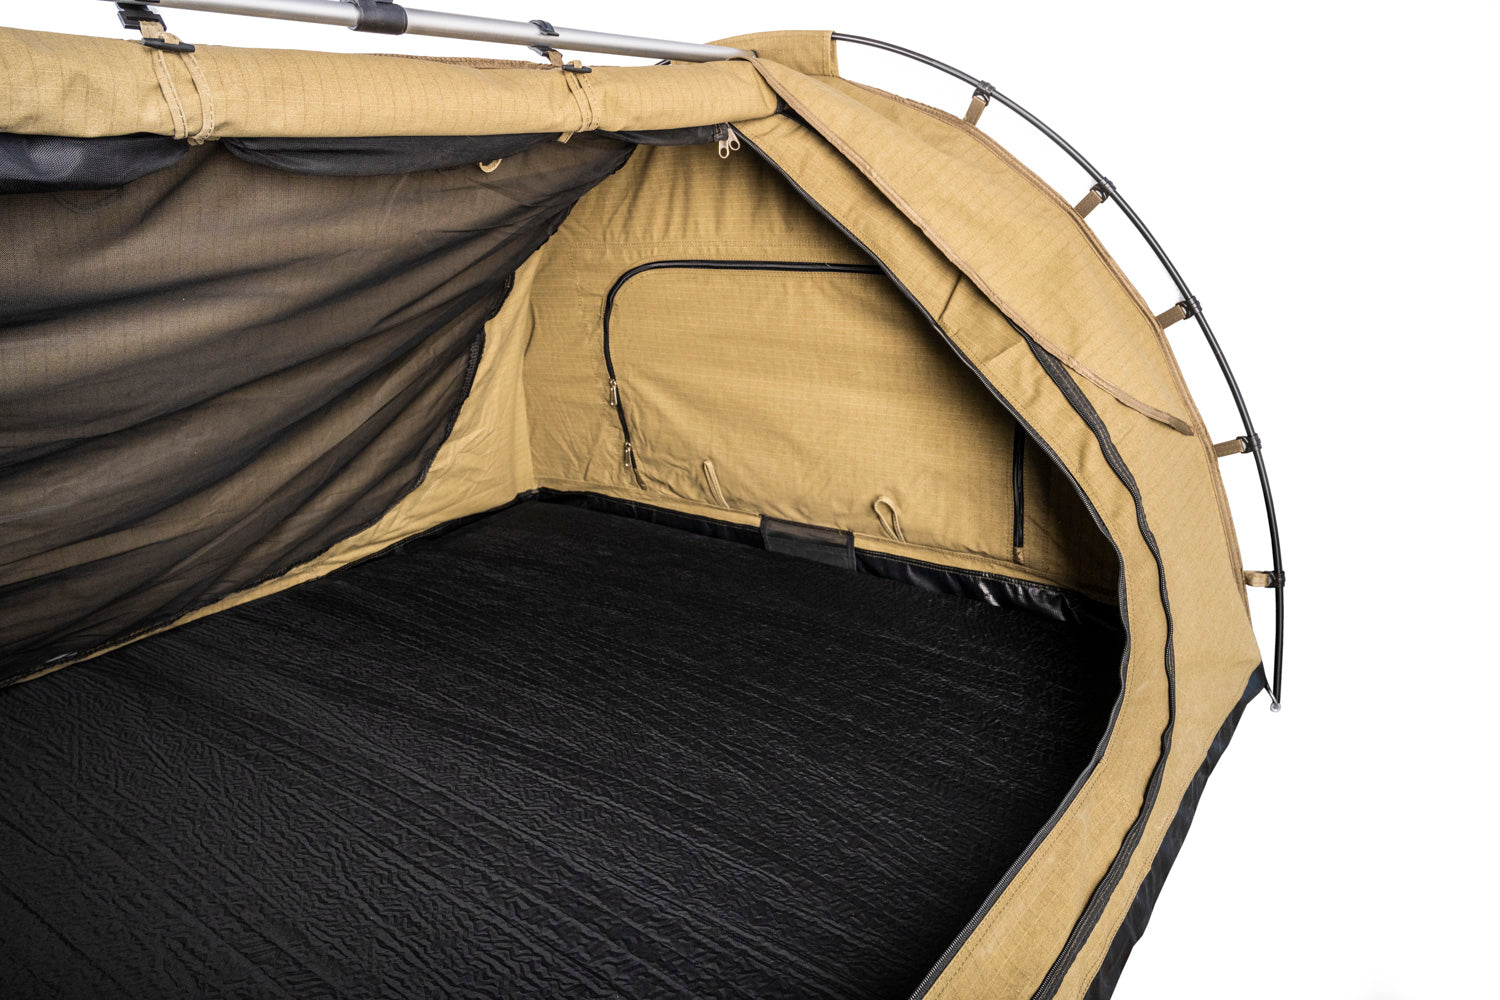 Adventure Kings Big Daddy Deluxe Double Swag Tent+ Storage Bag - jmscamping.com